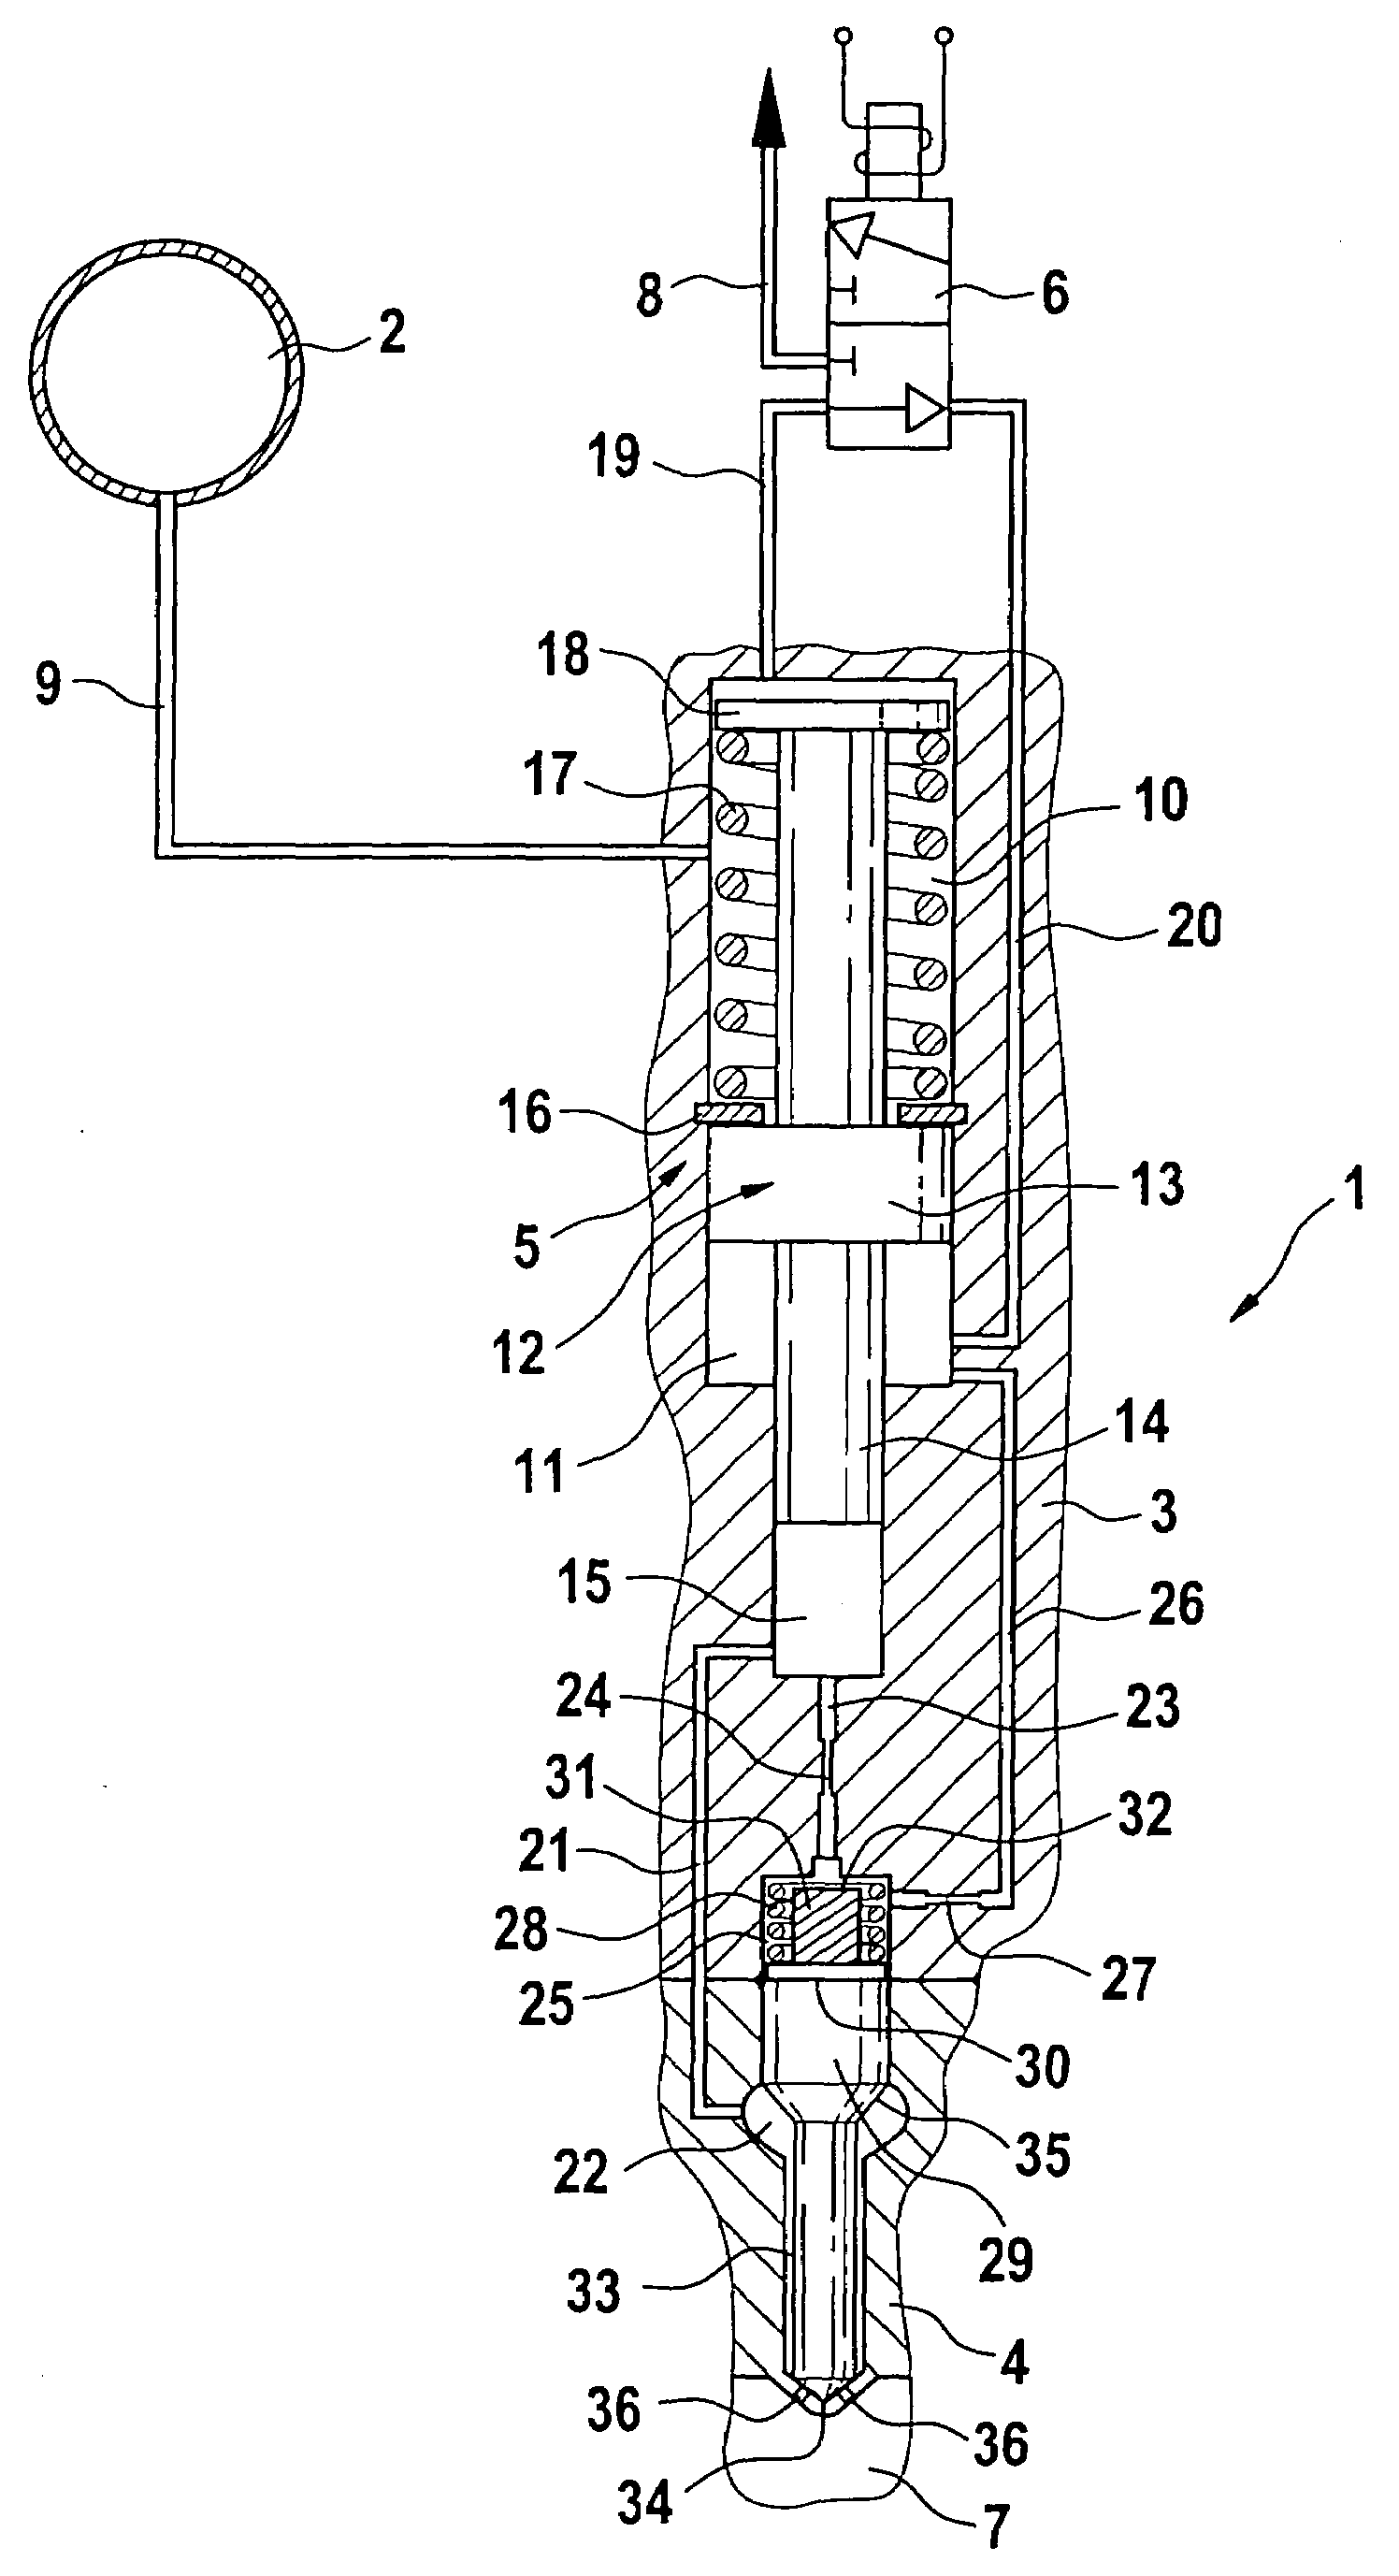 Device for damping the needle lift in fuel injectors